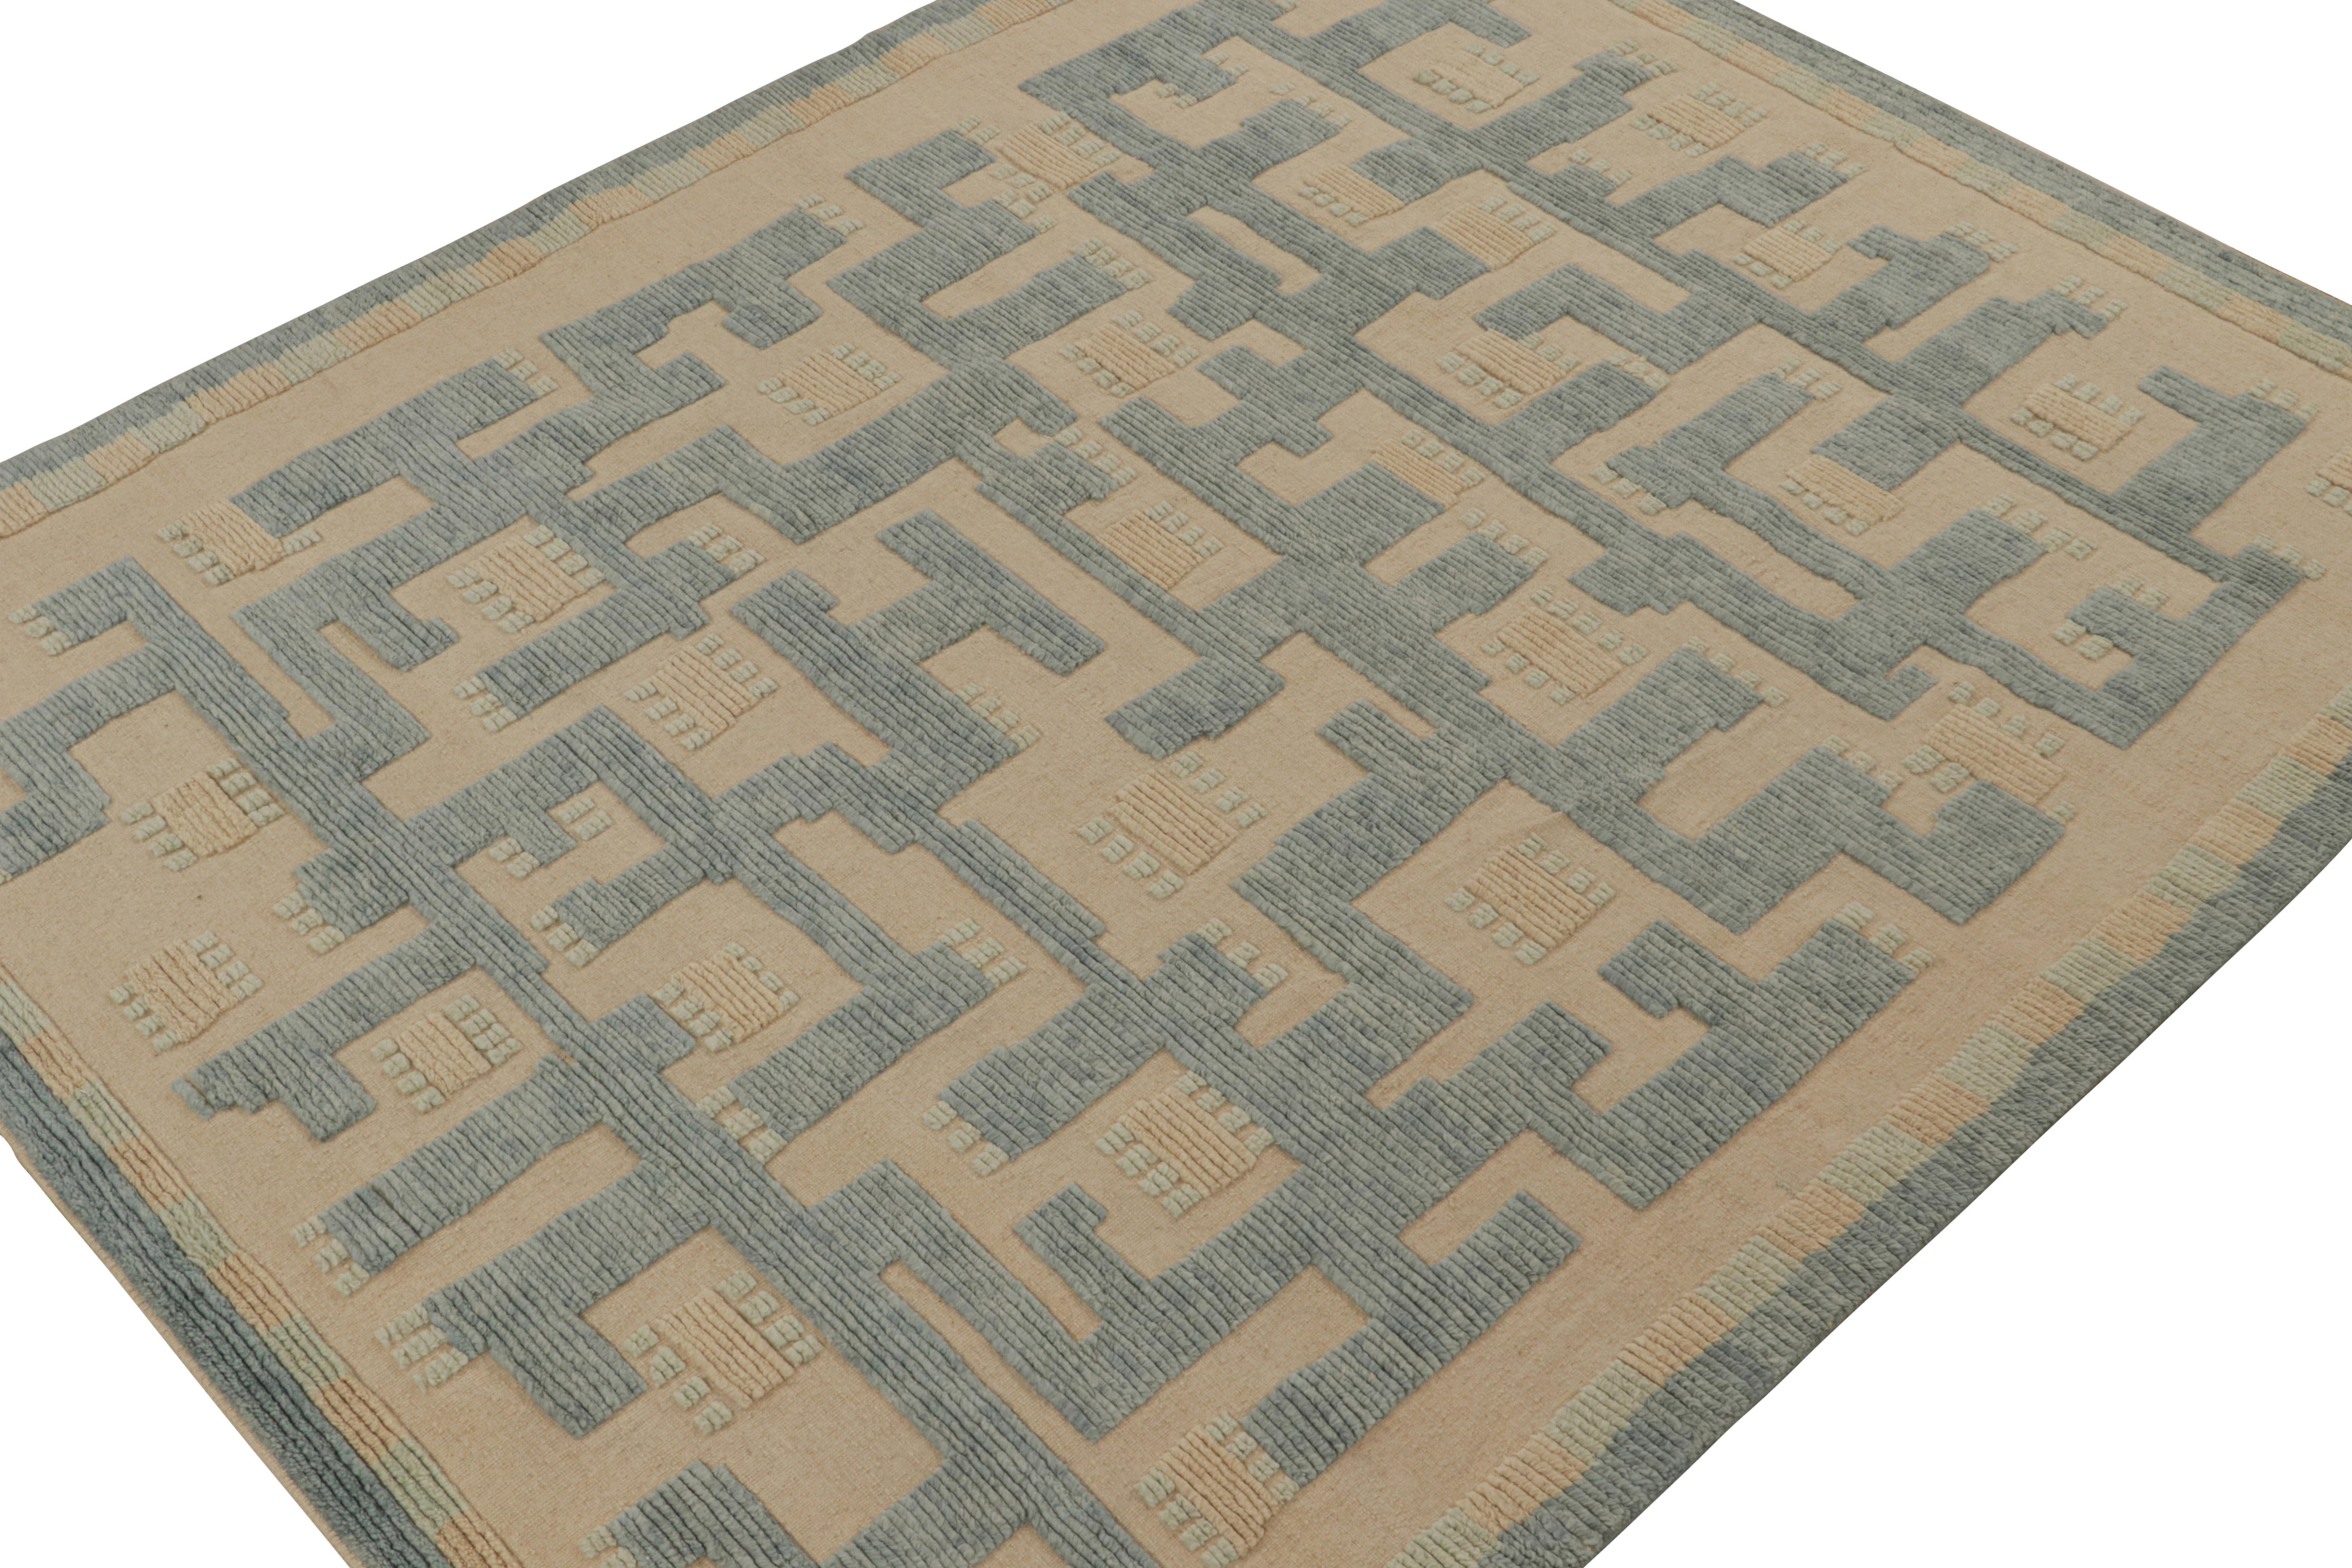 A smart 9x11 Swedish style rug from our award-winning Scandinavian collection. Handknotted in wool.

On the Design: 

This rug enjoys a high-low texture married to geometric patterns in blue & beige - creating an added depth in its presence. Keen